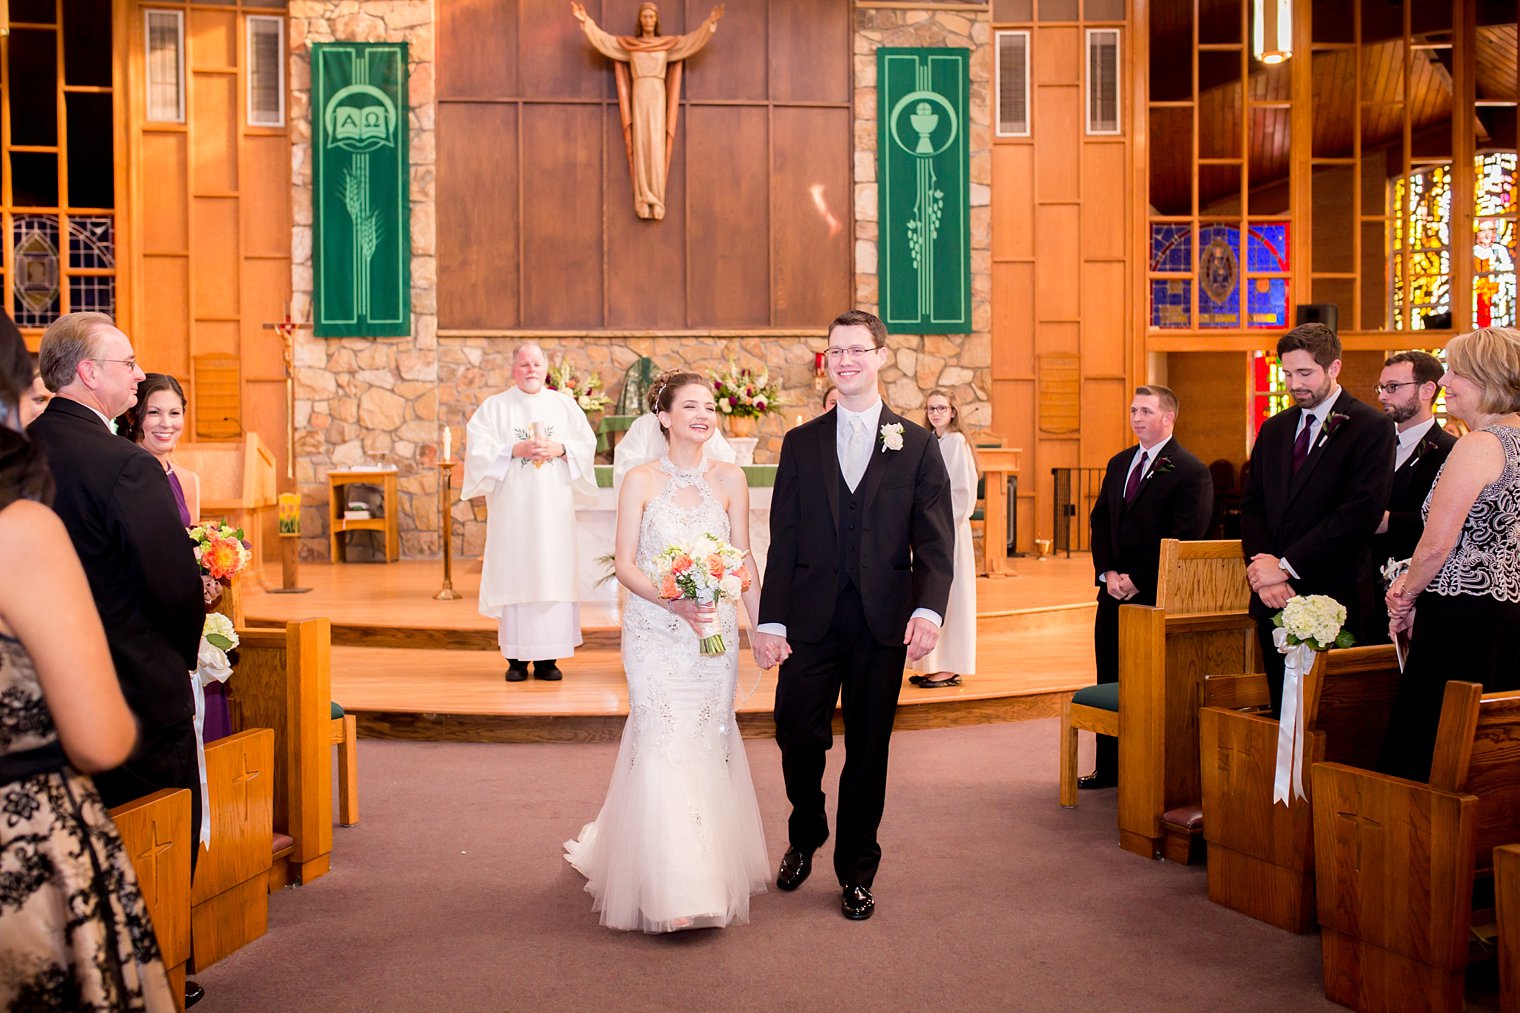 Our Lady of Mount Virgin recessional photos